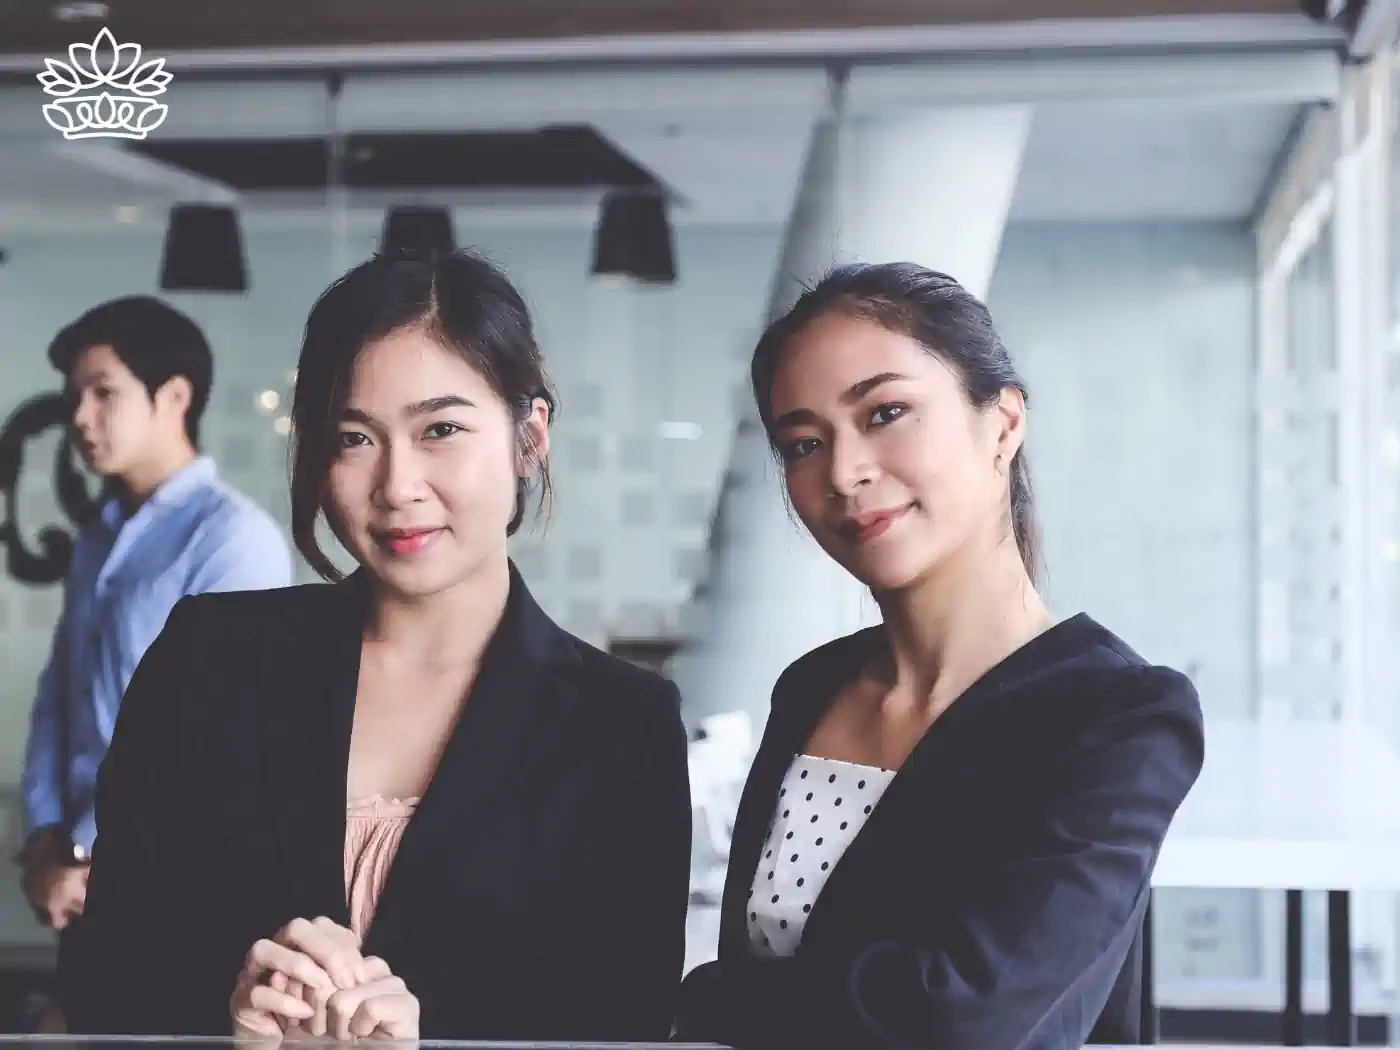 Confident young Asian businesswomen posing in a modern office environment, demonstrating professionalism and teamwork with a colleague in the background. Fabulous Flowers and Gifts - Gift Boxes for Clients. Delivered with Heart